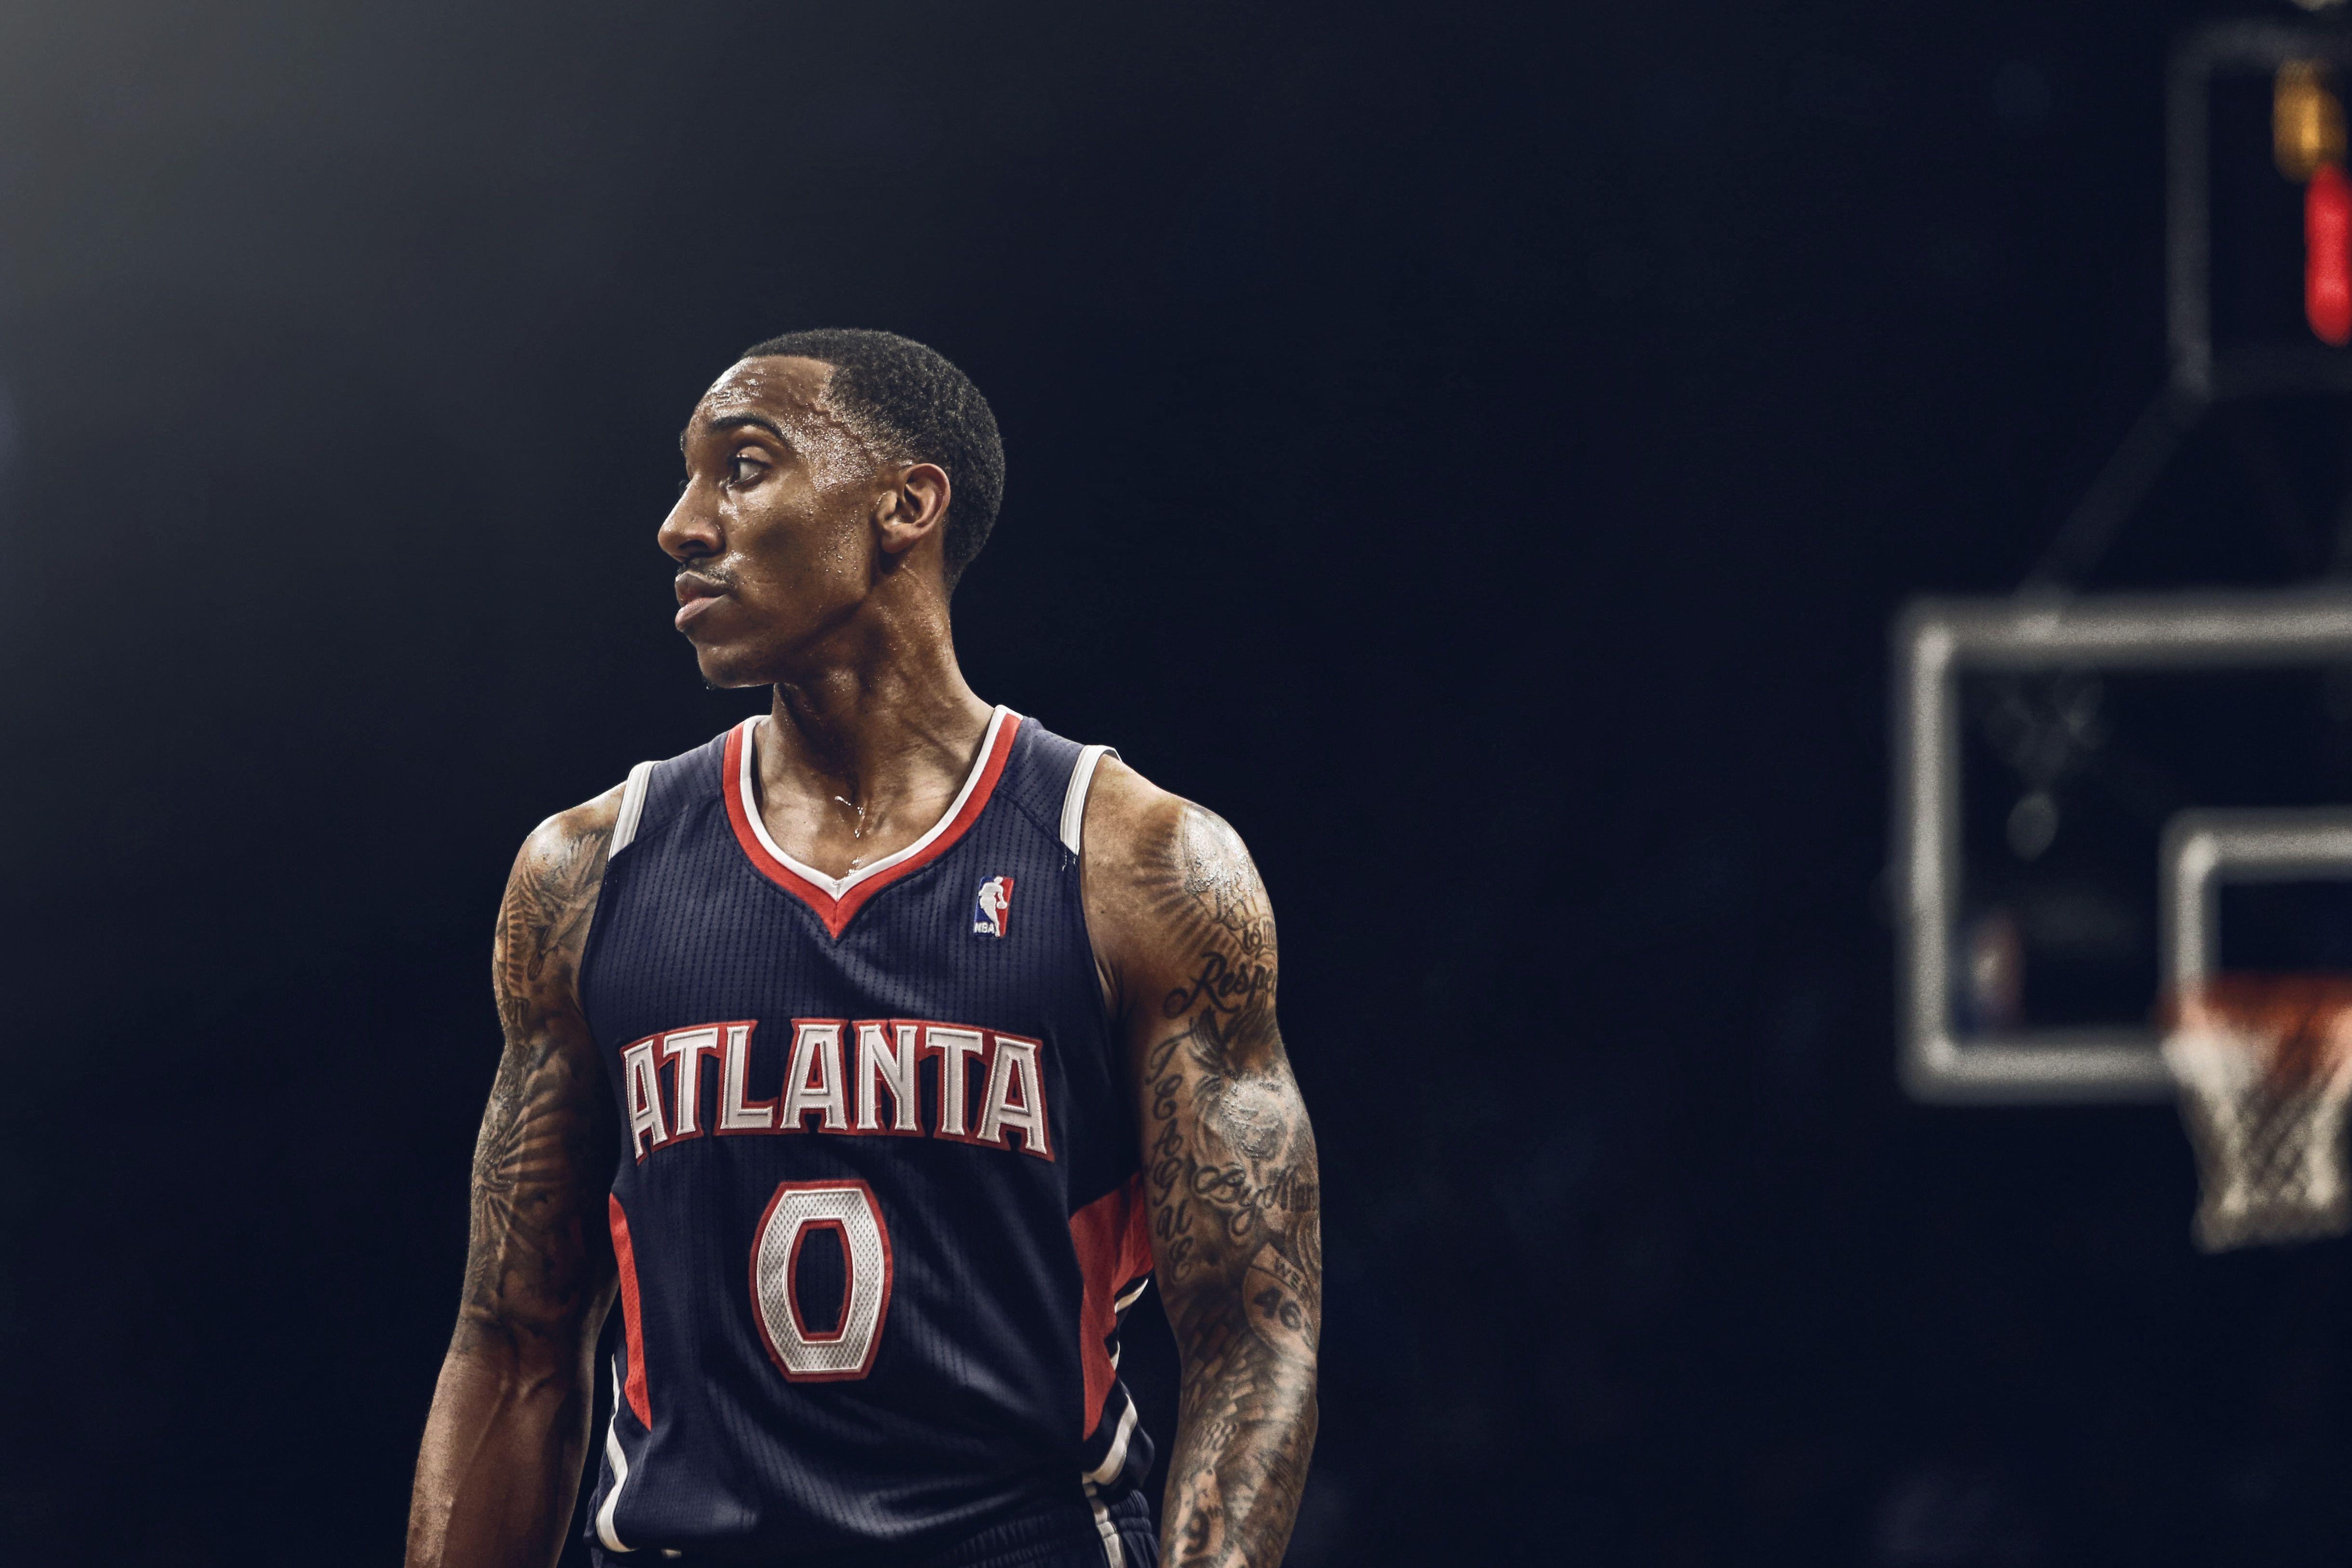 Jeff Teague Wallpaper High Resolution and Quality Download